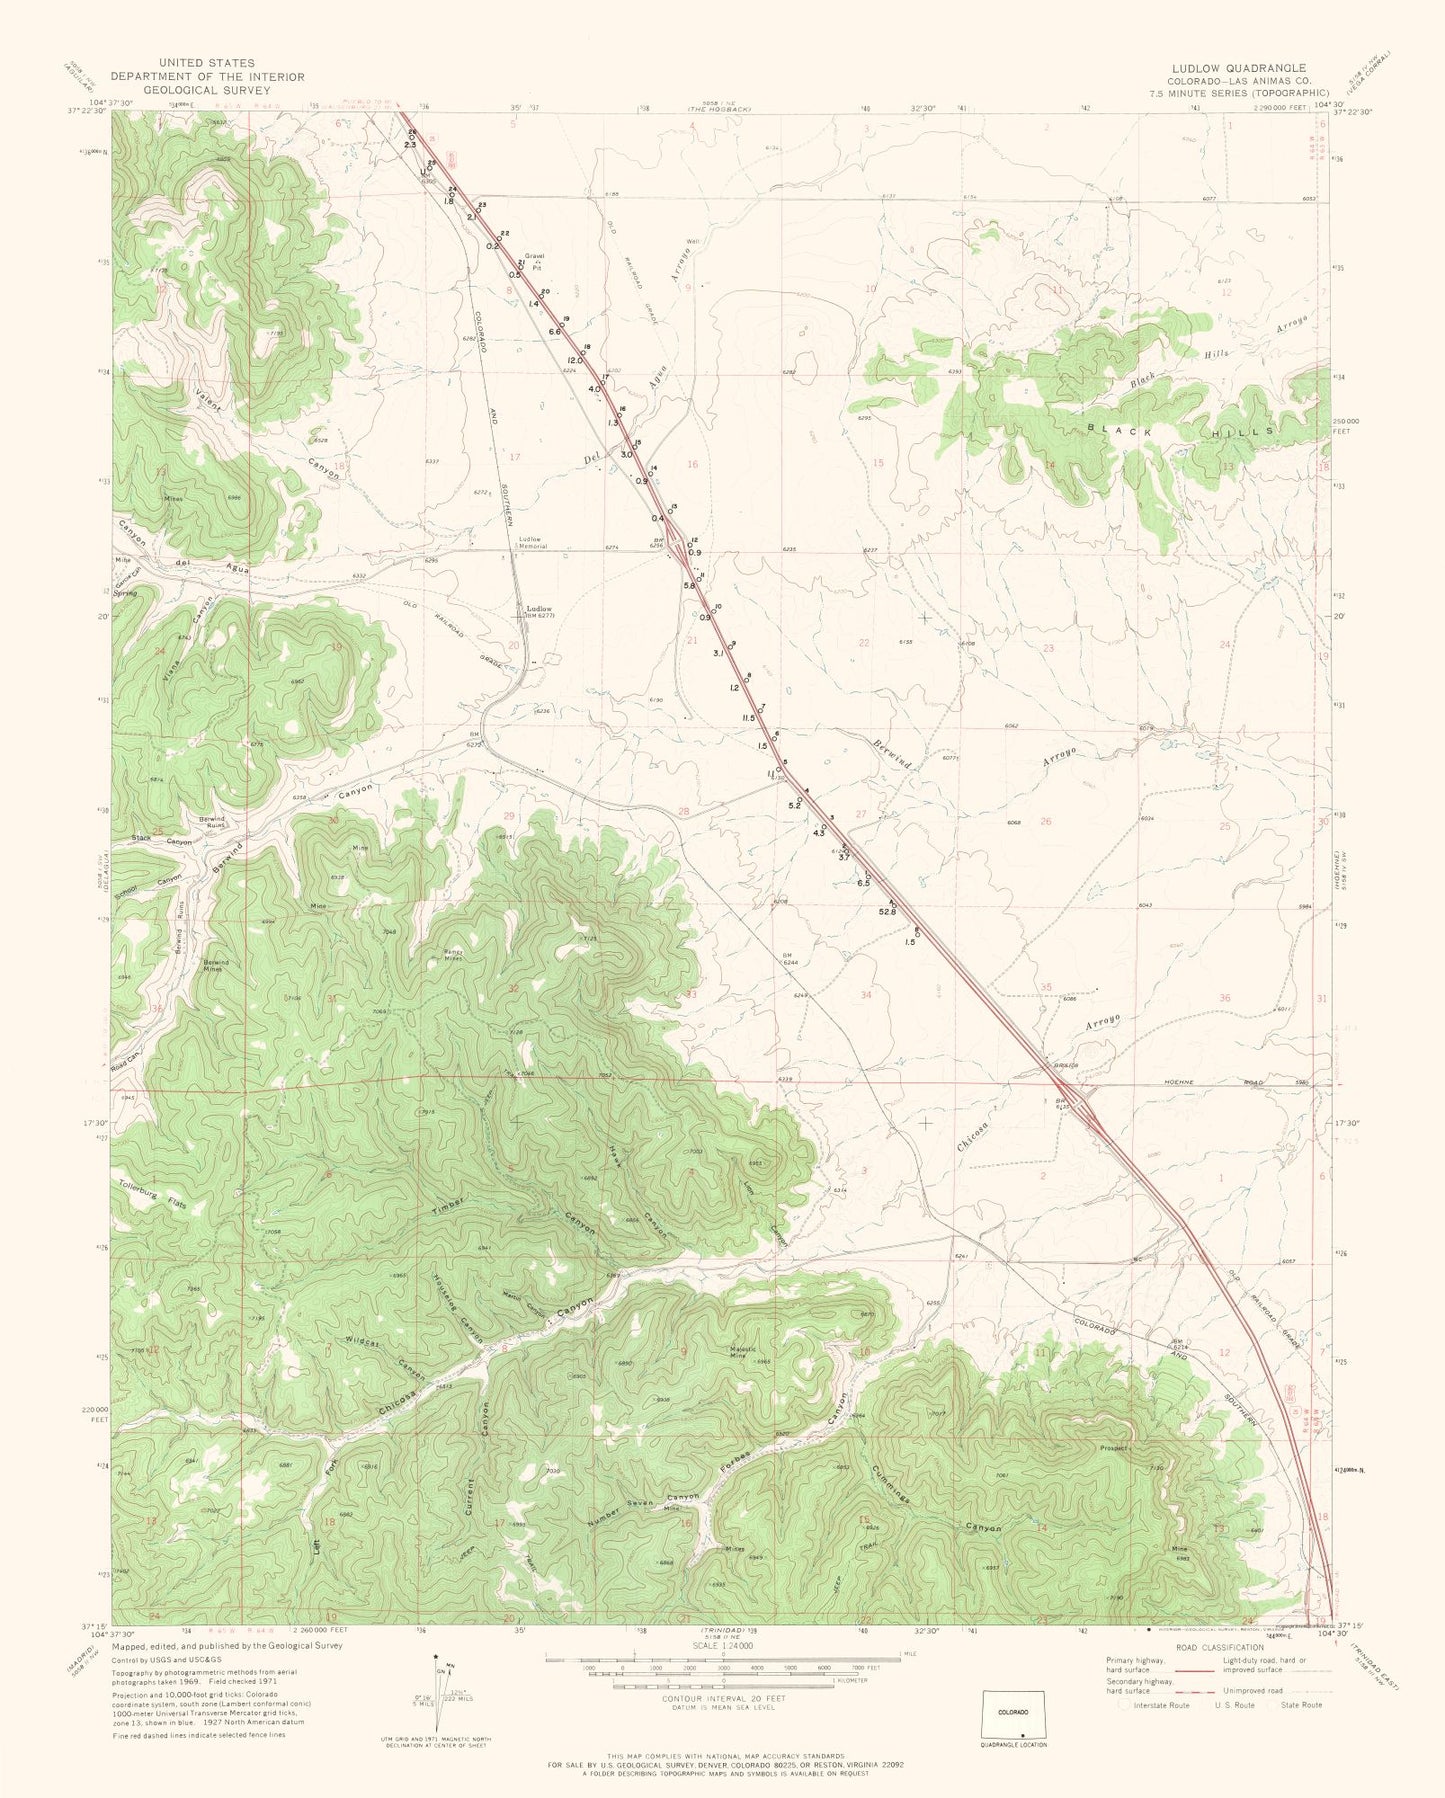 Topographical Map - Ludlow Colorado Quad - USGS 1971 - 23 x 28.63 - Vintage Wall Art